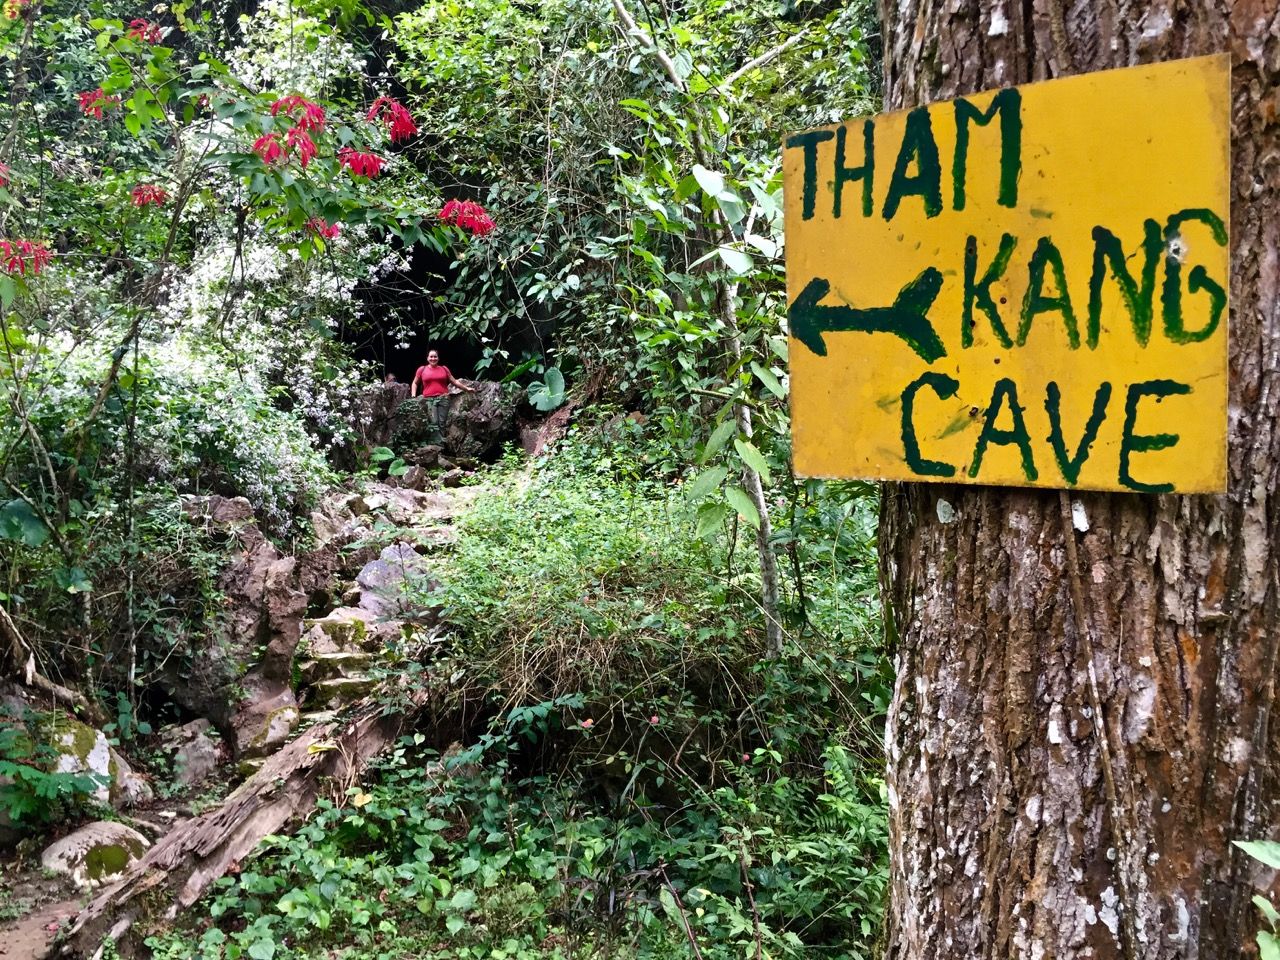 A sign pointing to a cave in a forest.